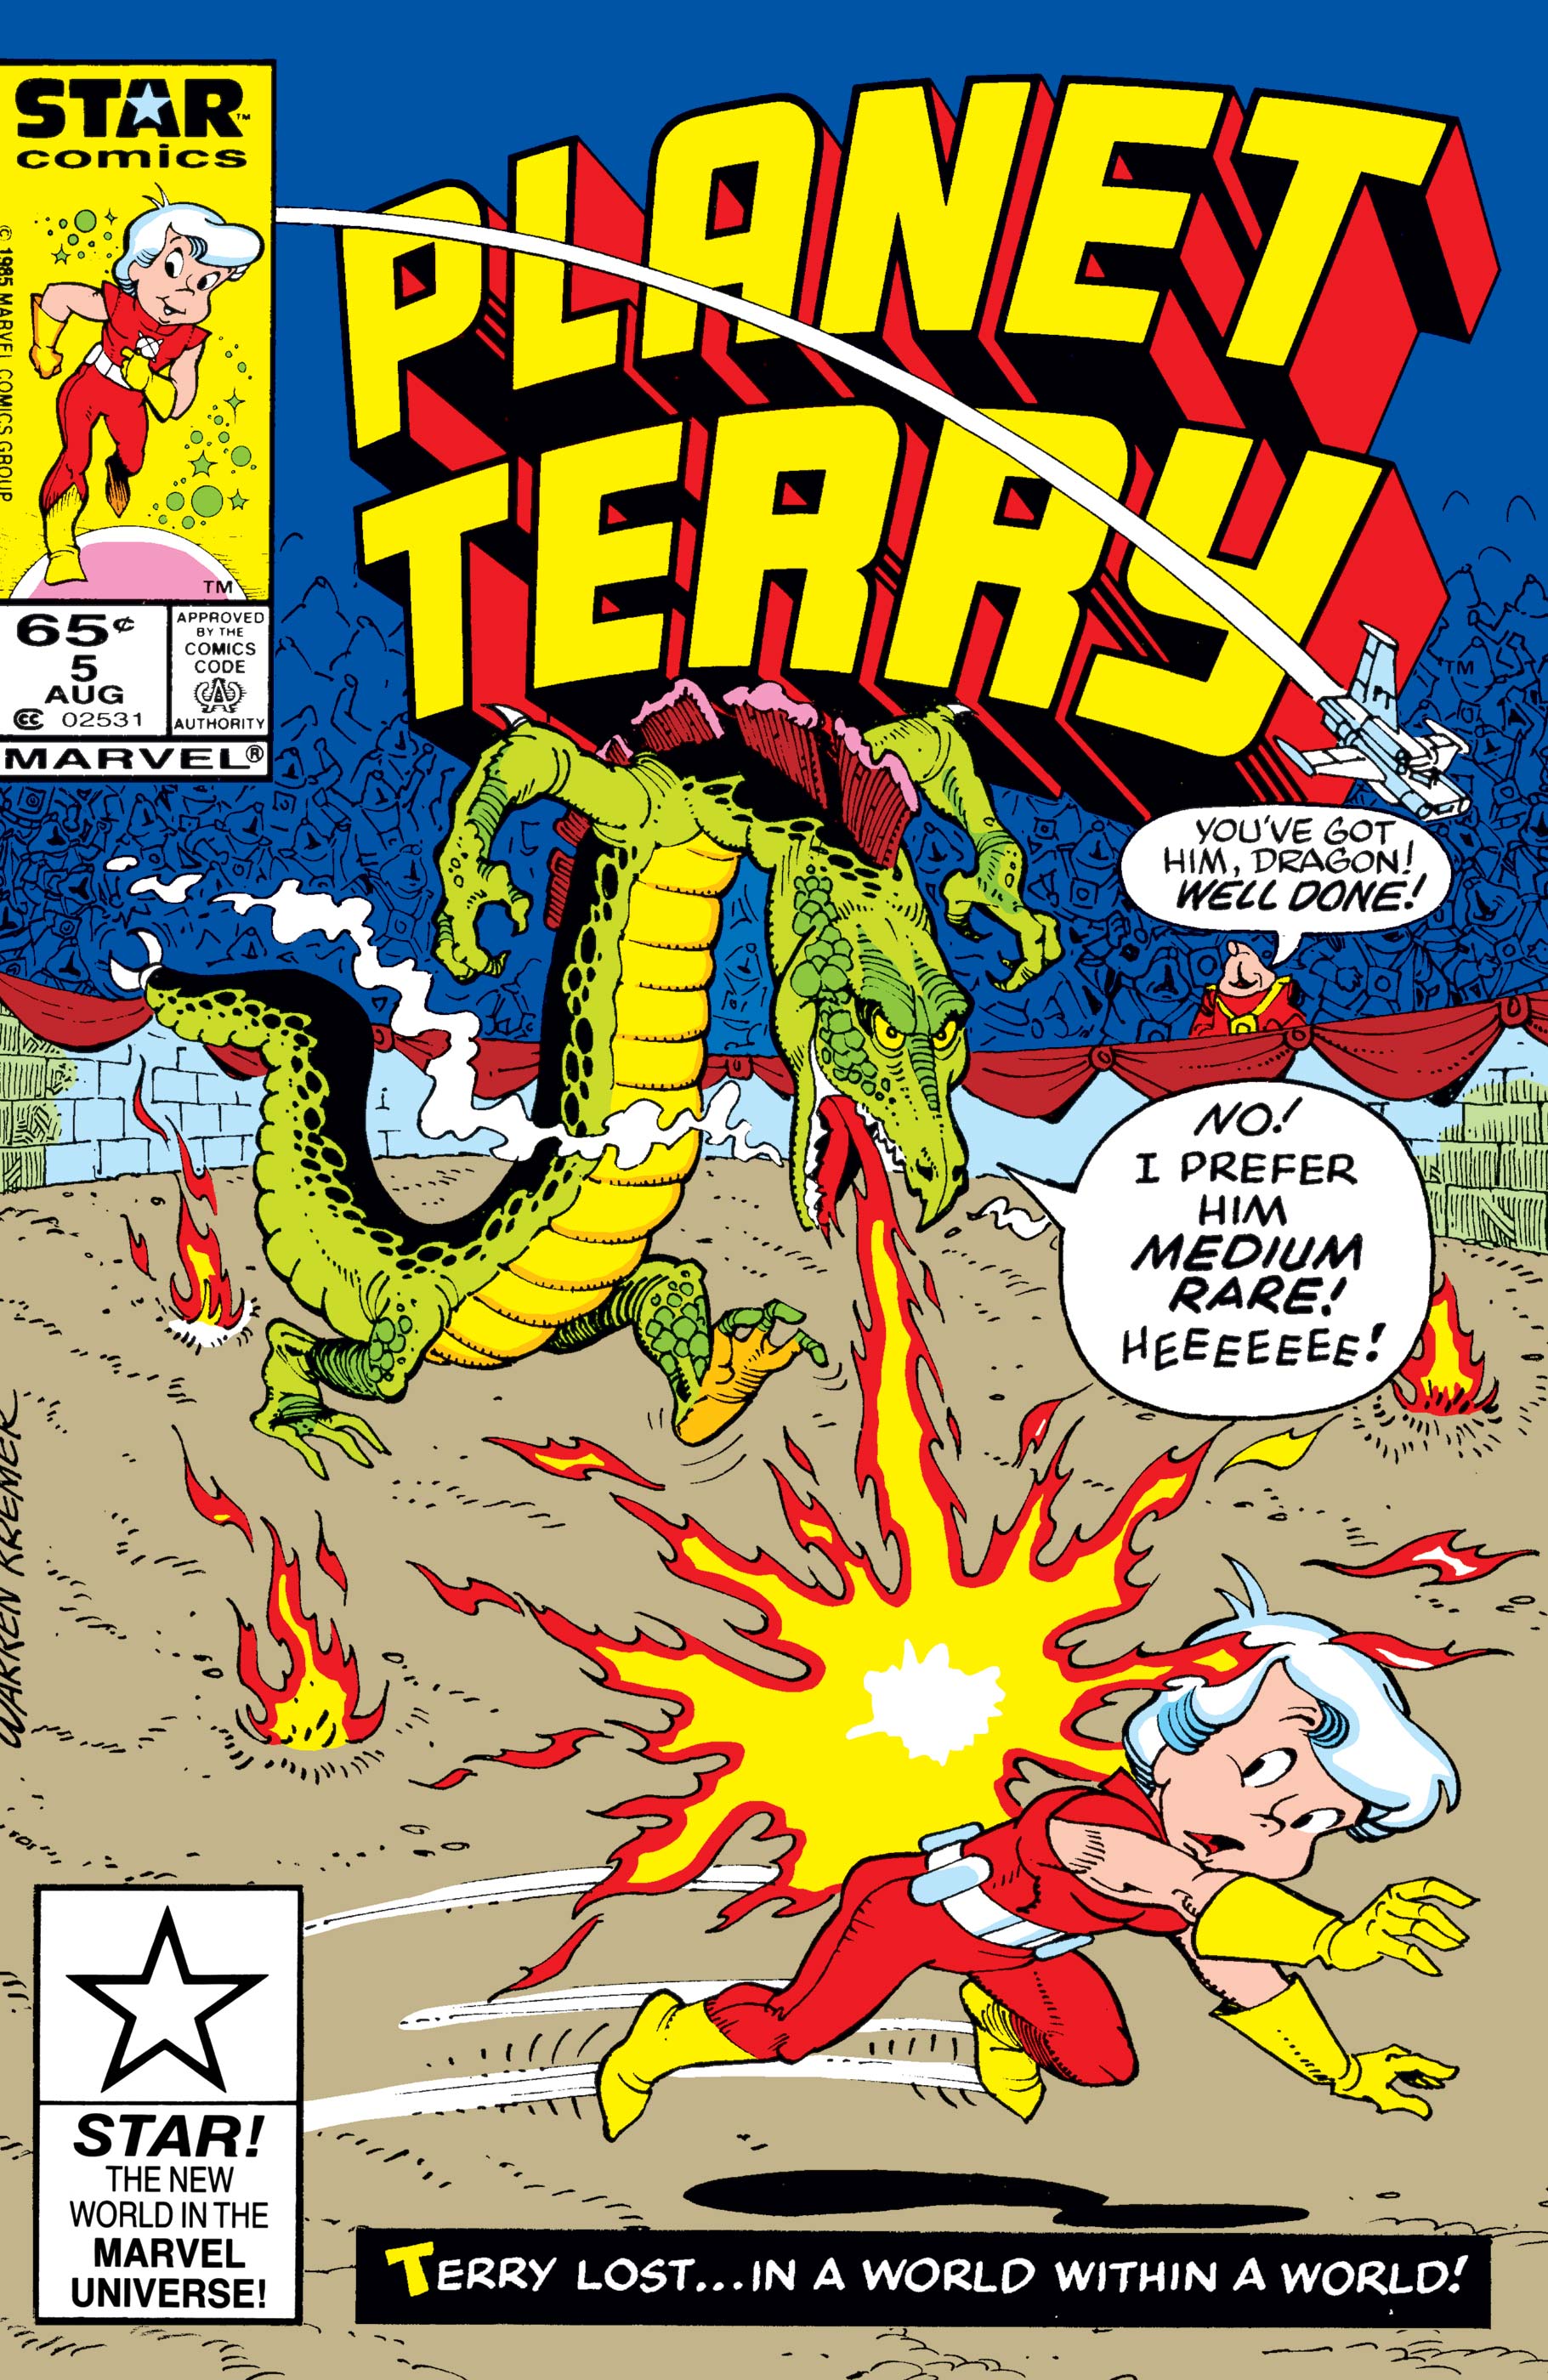 Planet Terry (1985) #5